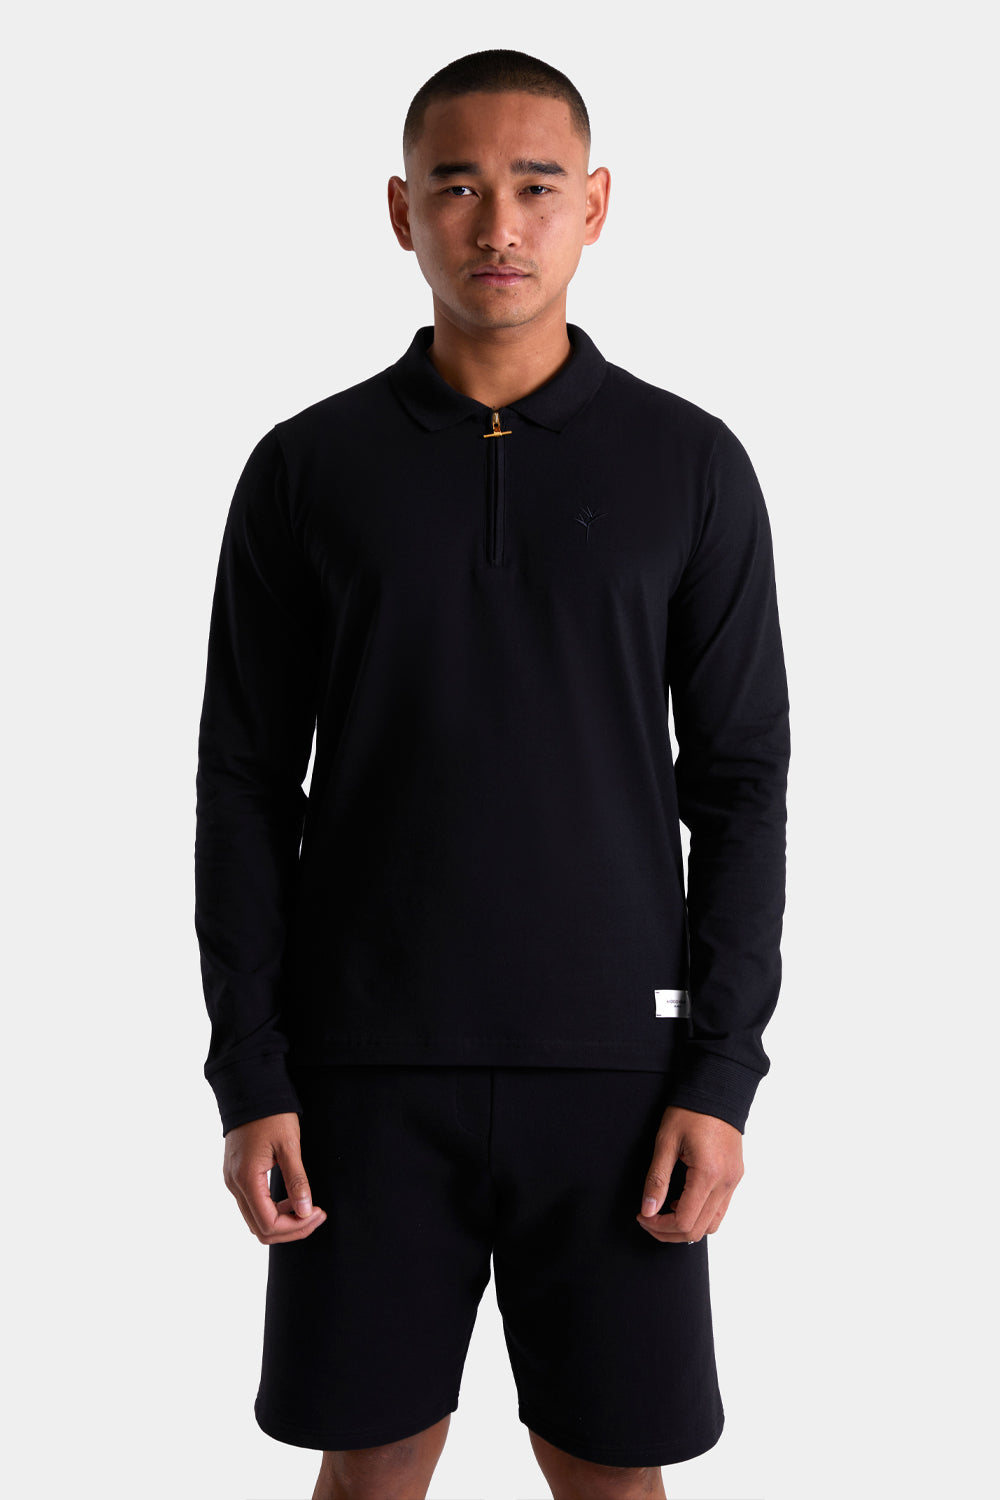 Buy the Android Homme Embroidered Long Sleeve Zip Polo Black at Intro. Spend £50 for free UK delivery. Official stockists. We ship worldwide.